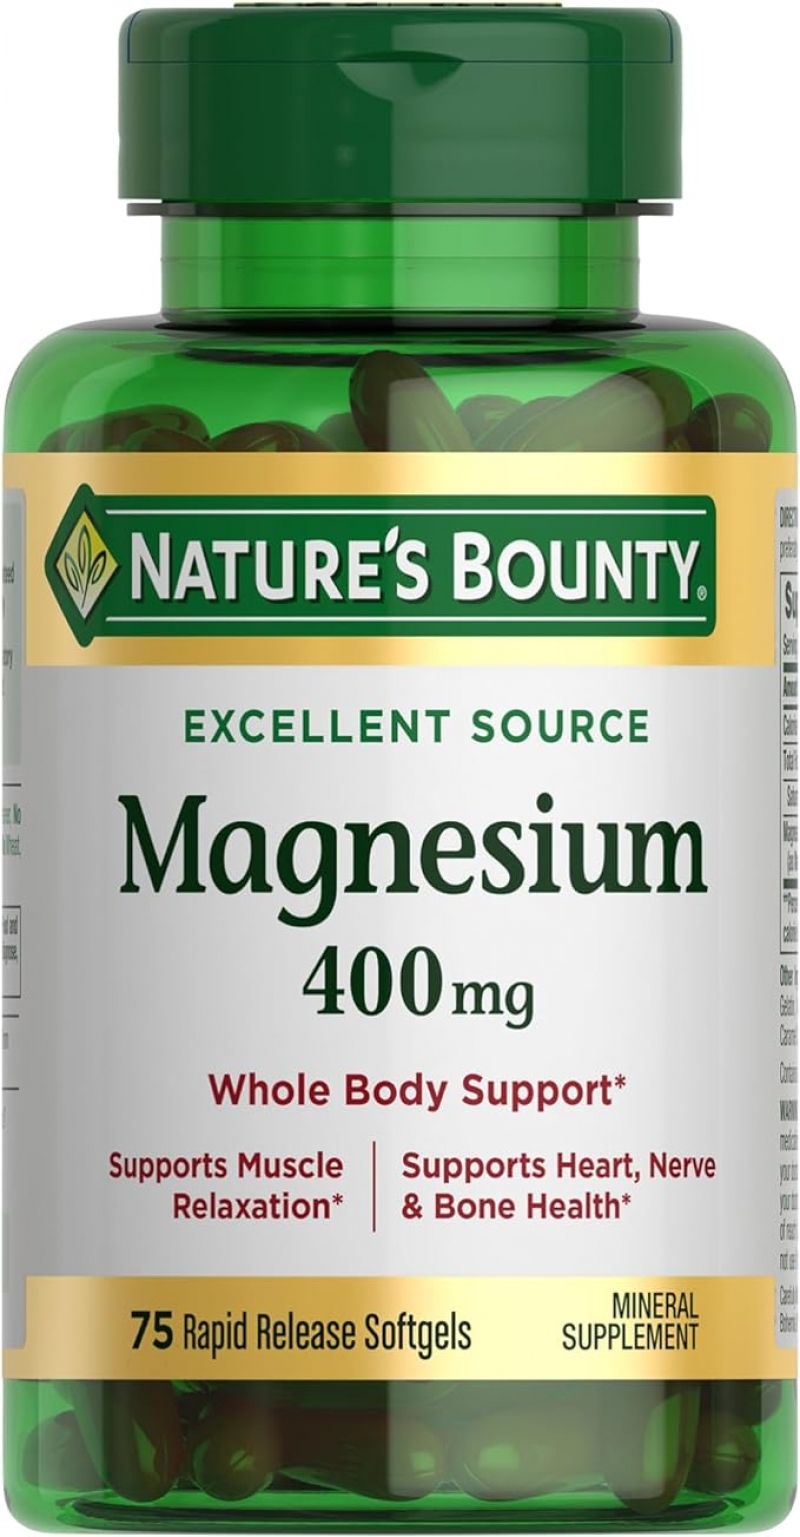 ihocon: Nature's Bounty Magnesium, Whole Body Support, Supports Heart, Nerve and Bone Health鎂劑, 400 mg, 75粒